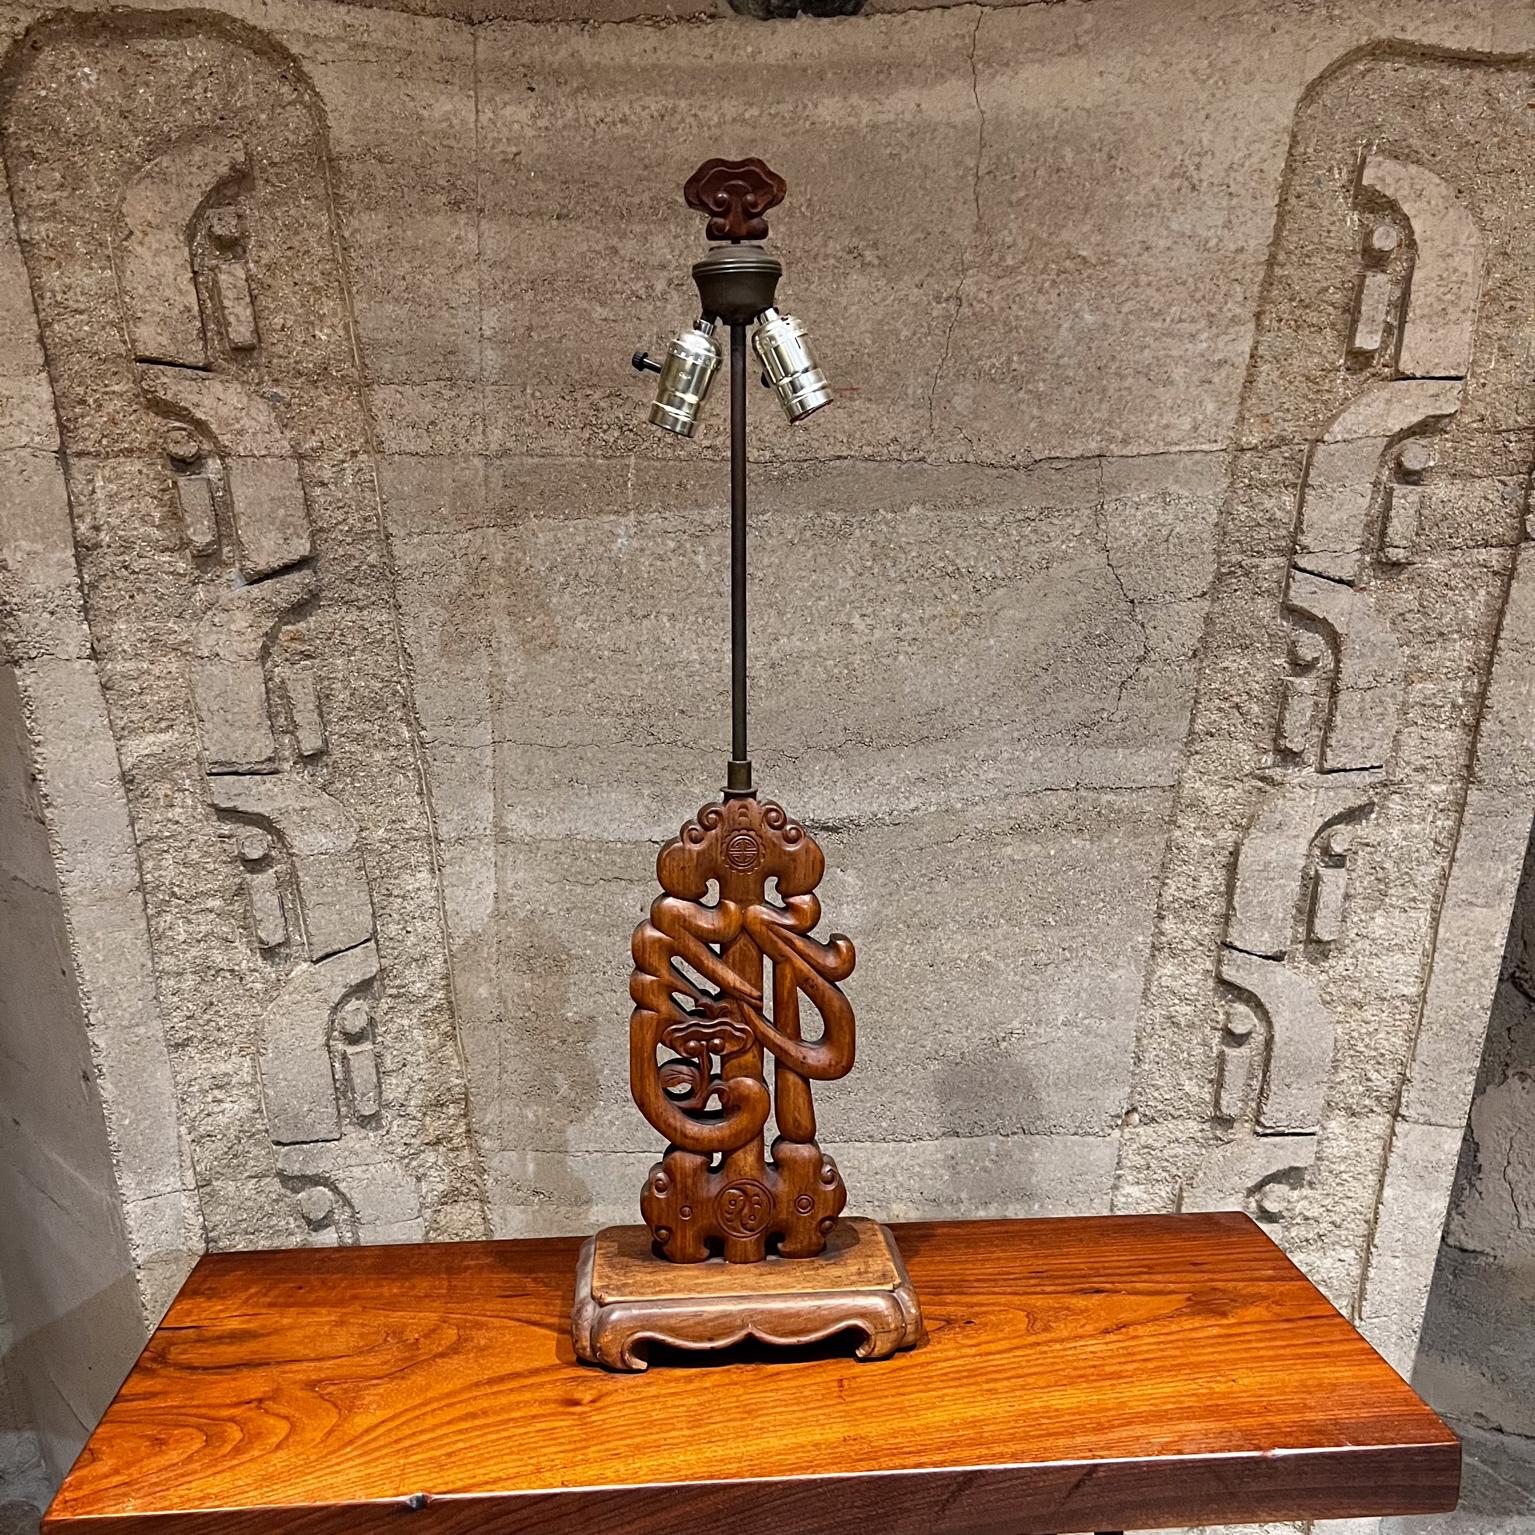 1960s Hand Carved Mahogany Wood Chinese Table Lamp
No shade.
Double socket with matching wood finial
30.25 h x 9 w x 5.5 d
Unmarked
Original vintage unrestored condition.
Refer to images.